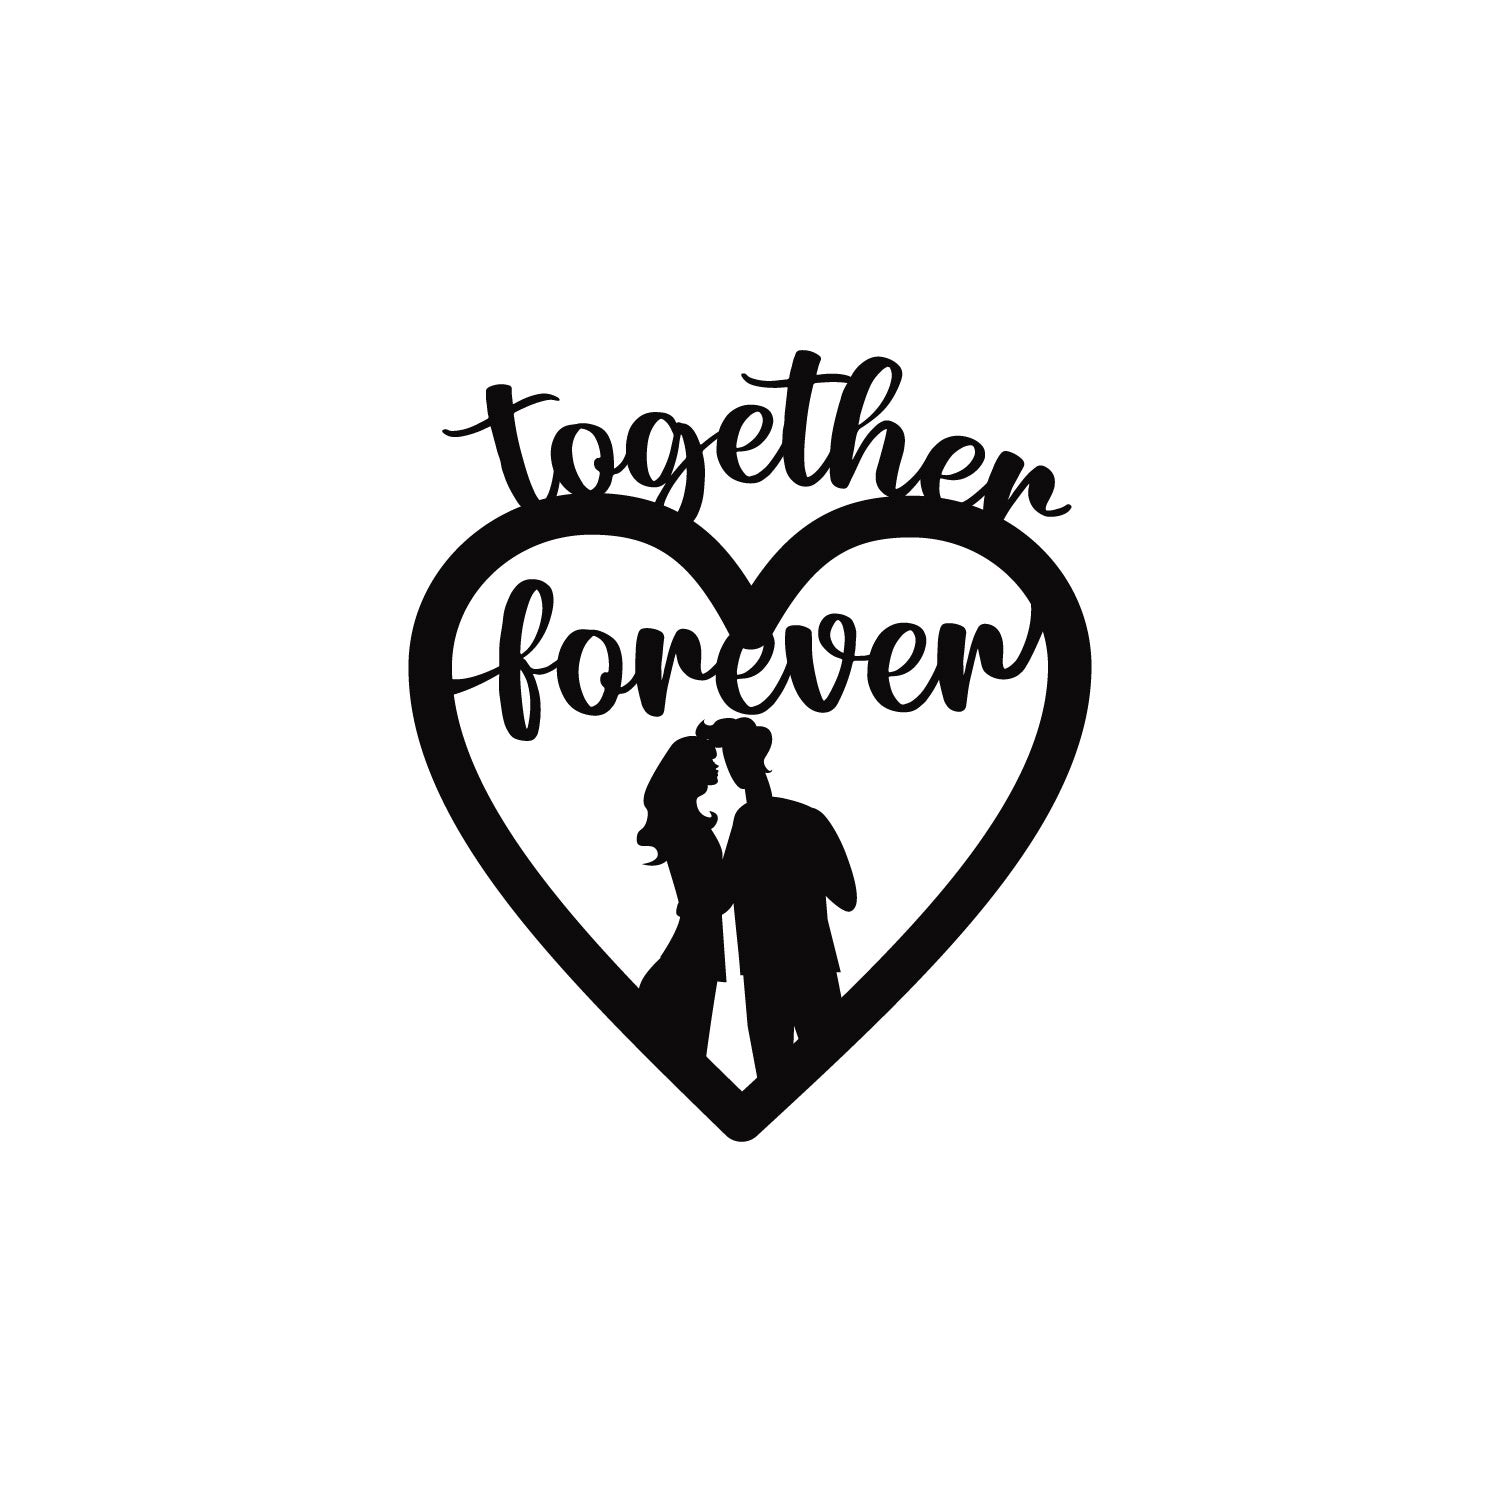 "Together Forever" Love Theme Black Engineered Wood Wall Art Cutout, Ready to Hang Home Decor 2